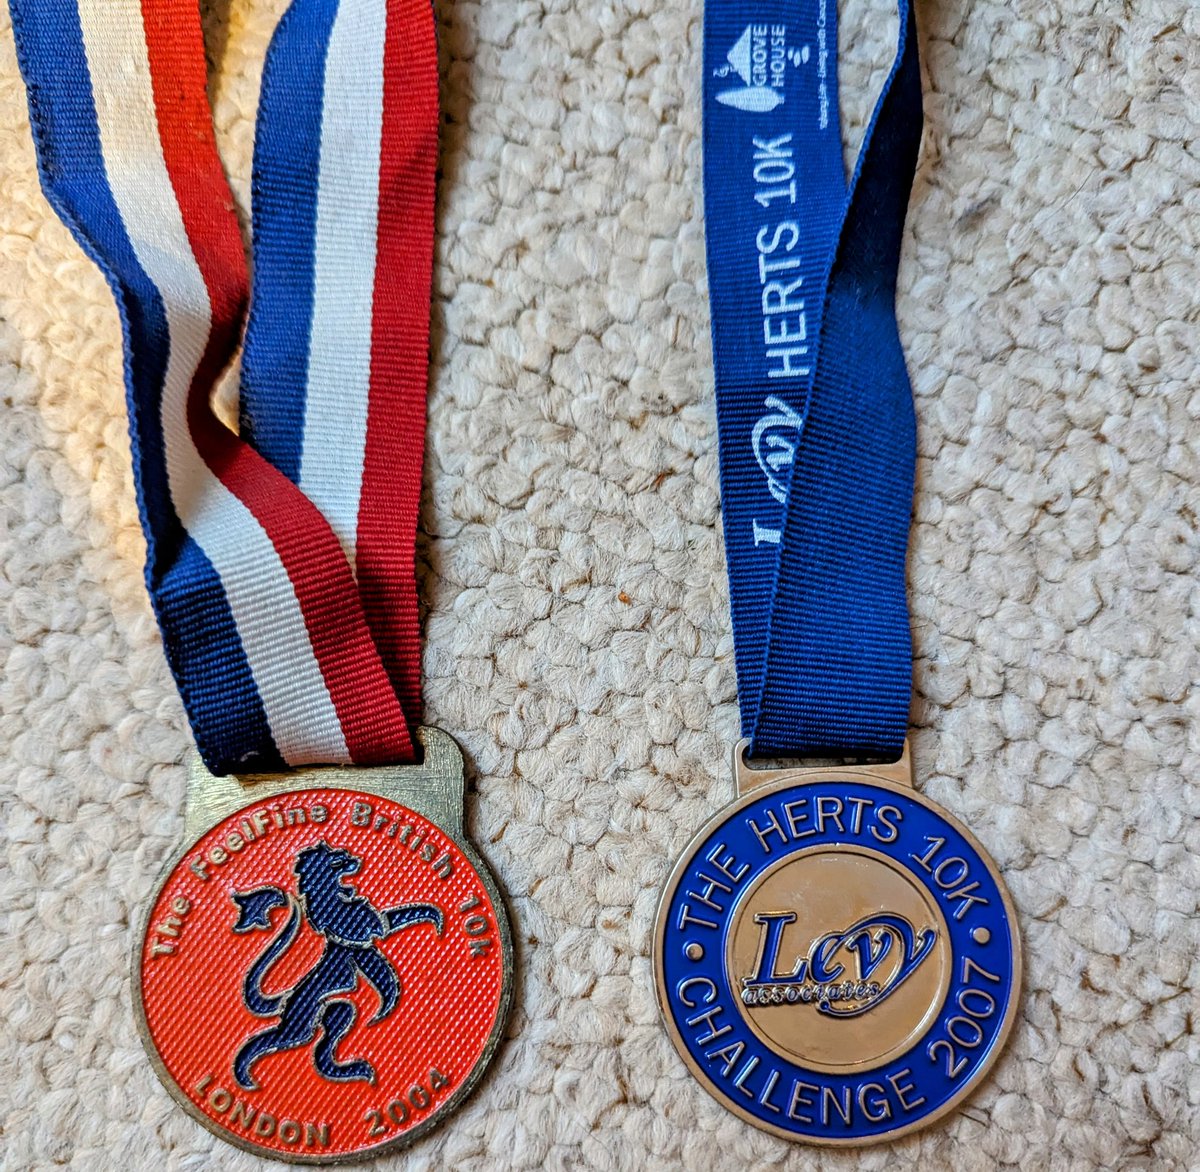 The things you find when you are having a clear out. Can't believe the London one was 20 years ago! @UKRunChat @HamwicHarriers